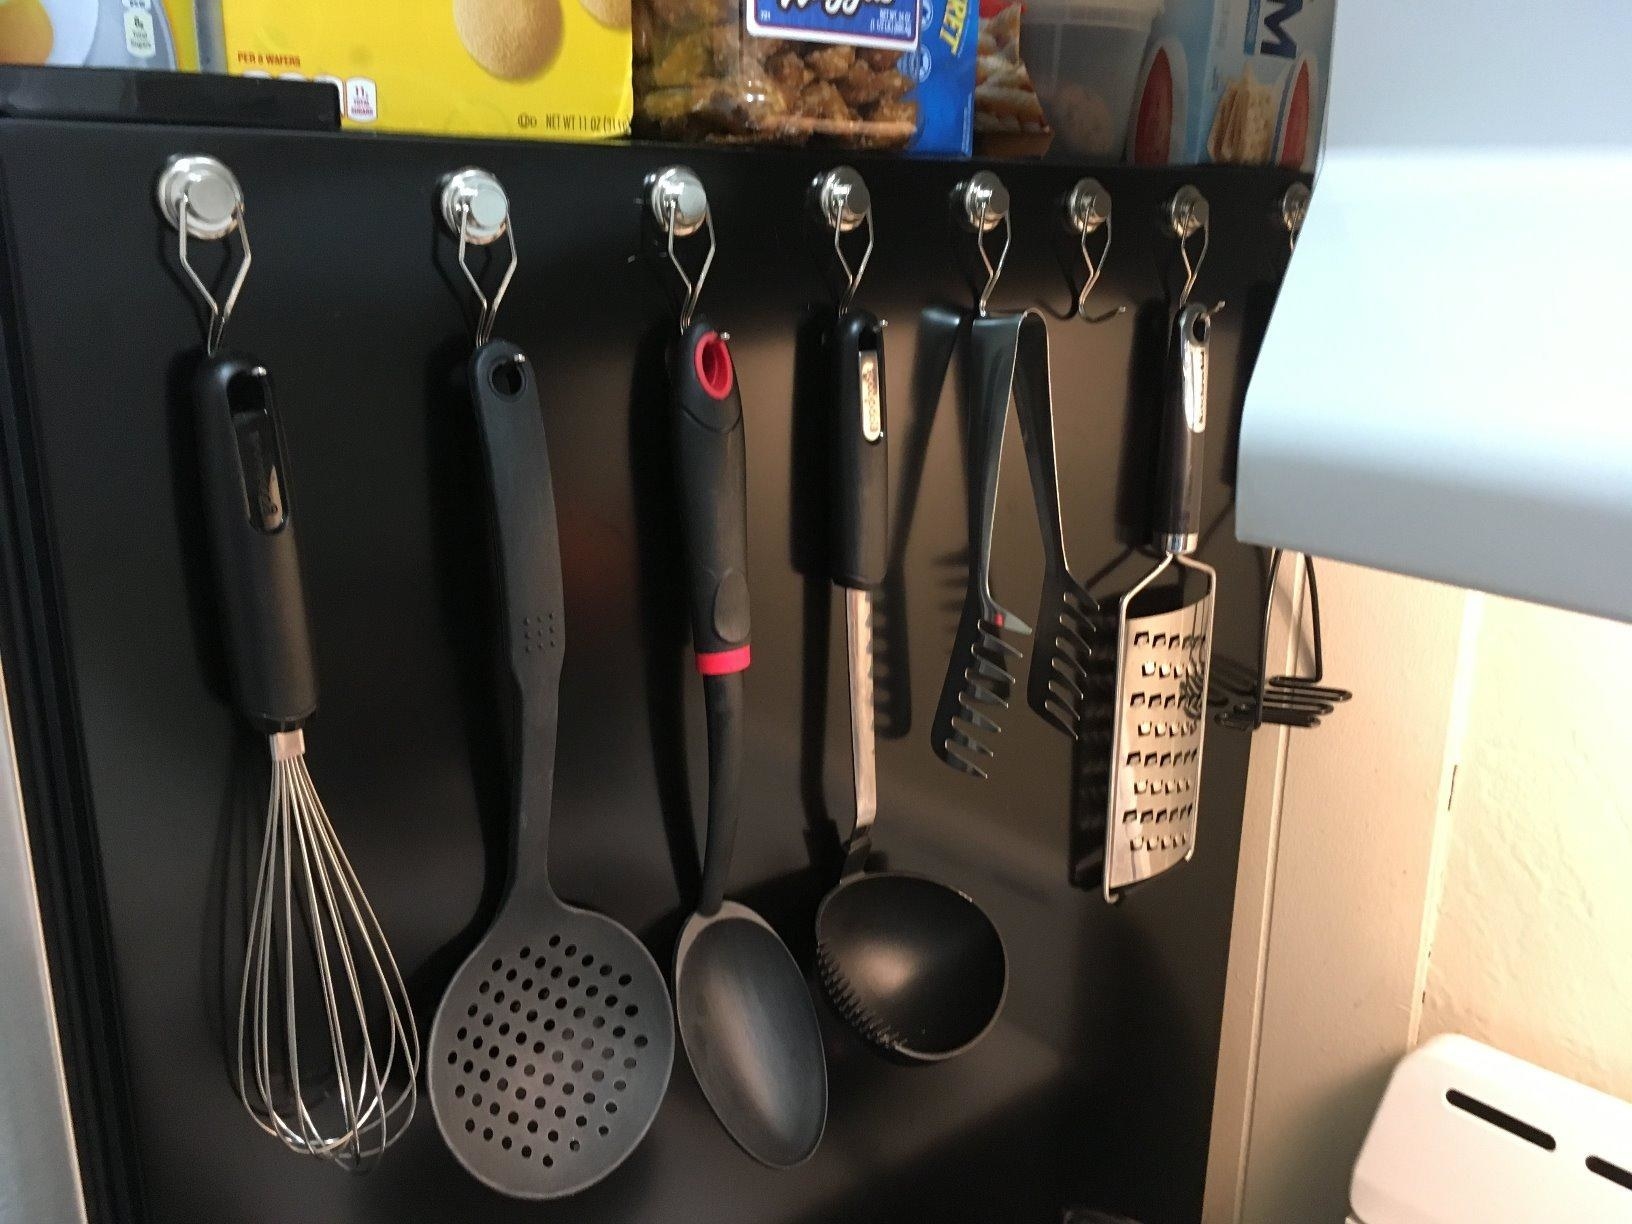 Eight silver magnetic hooks attached to a refrigerator holding utensils